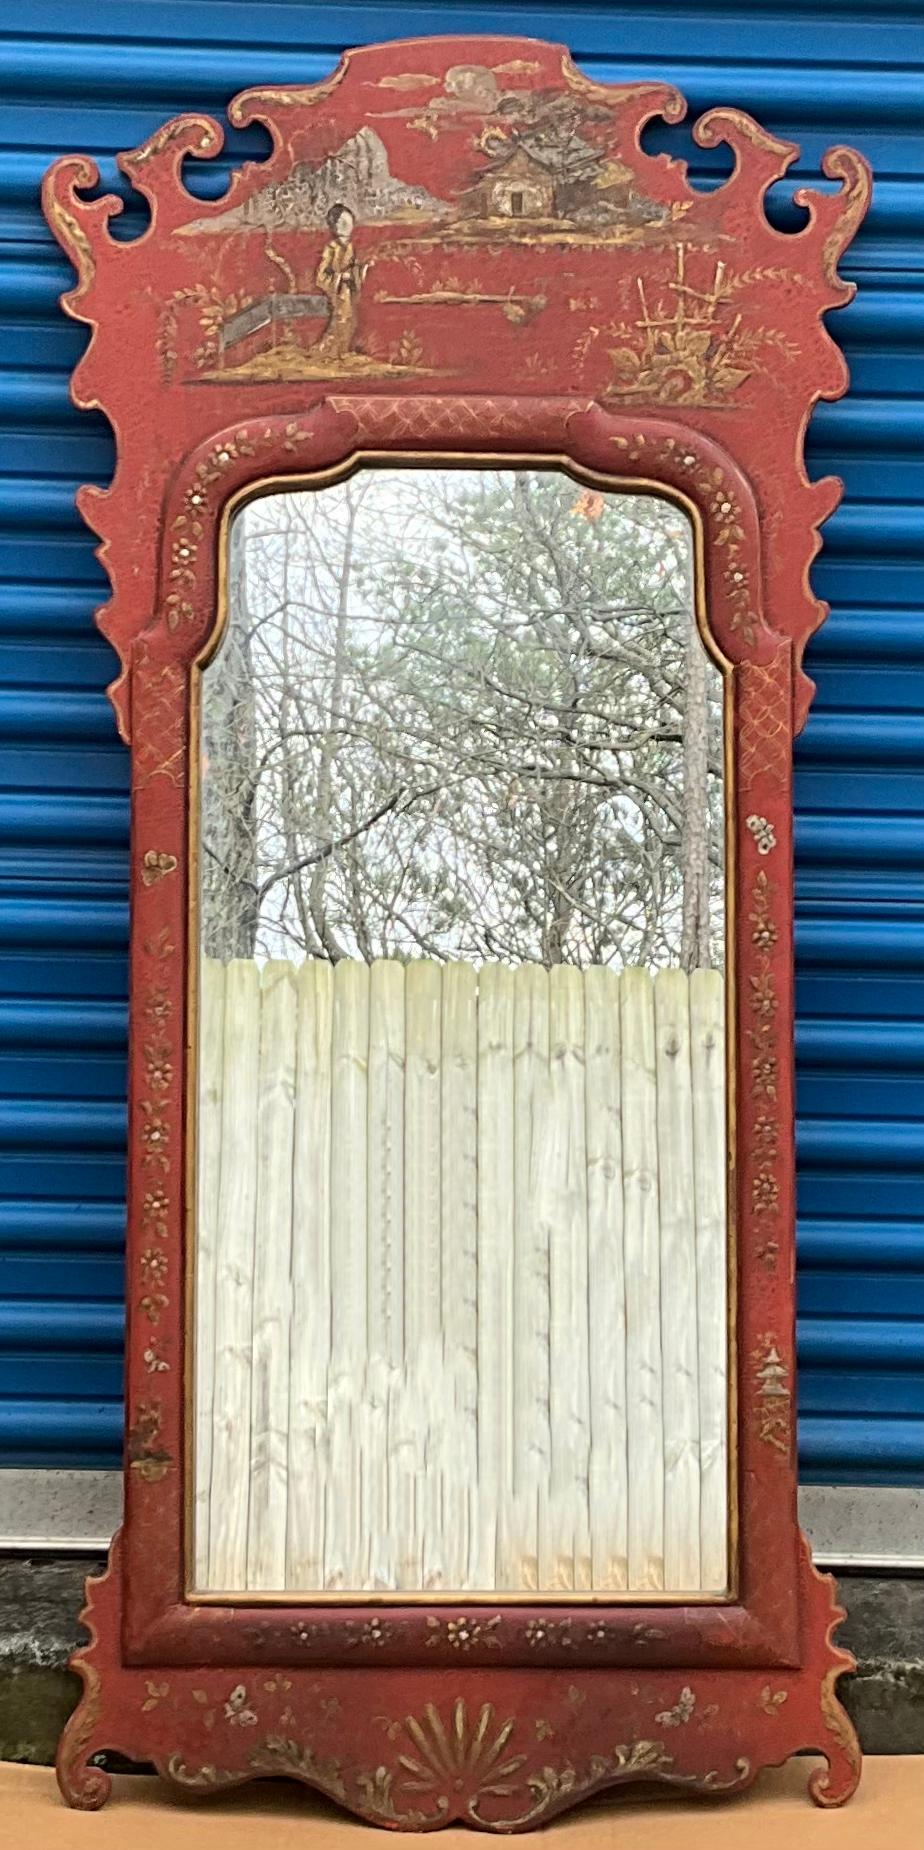 This is a lovely hand painted chinoiserie mirror with Georgian styling. It depicts hand painted pastoral scenes on a Chinese red background. The frame is wood and unmarked. It is believed to be Italian.